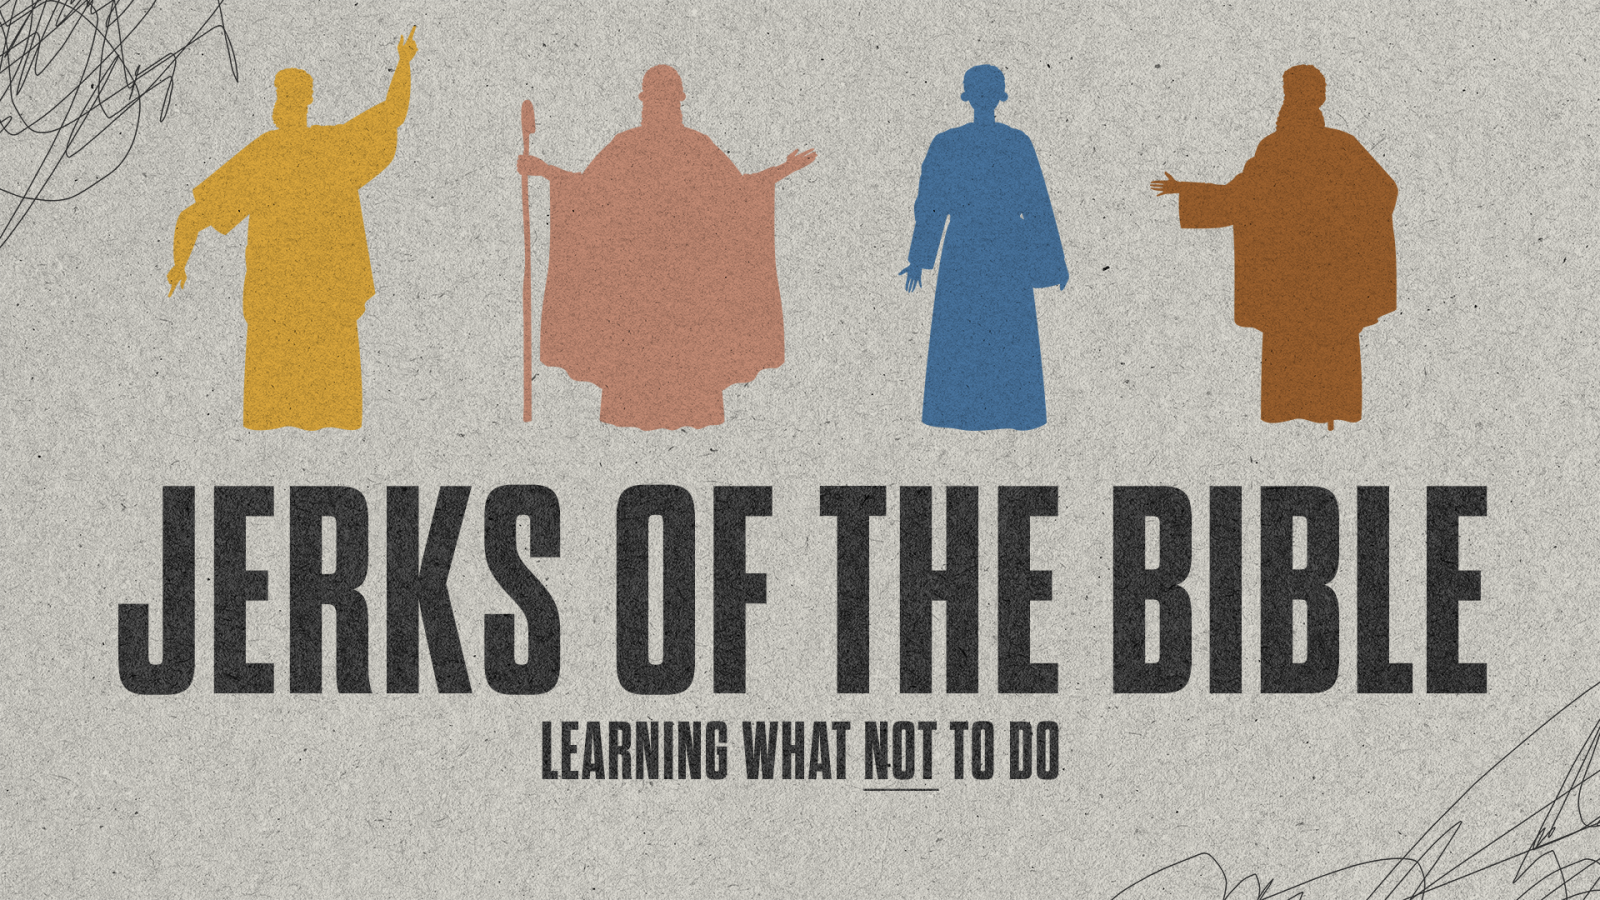 Jerks of the Bible